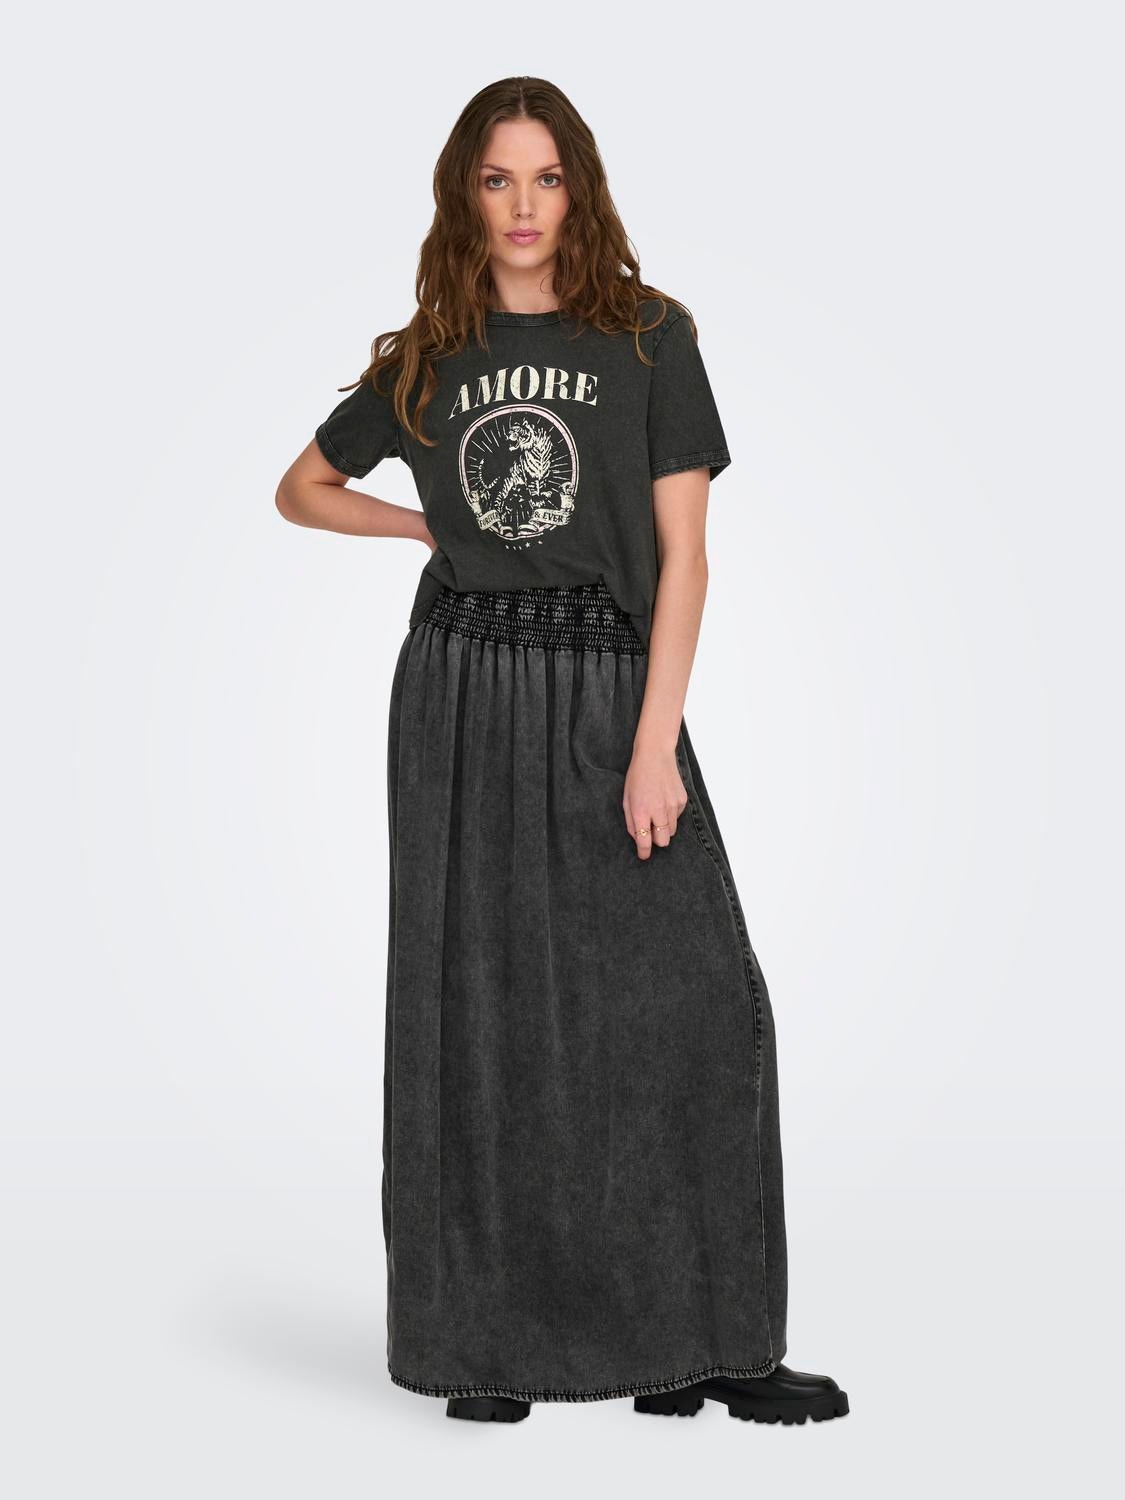 ONLY High waist Long skirt -Washed Black - 15320036